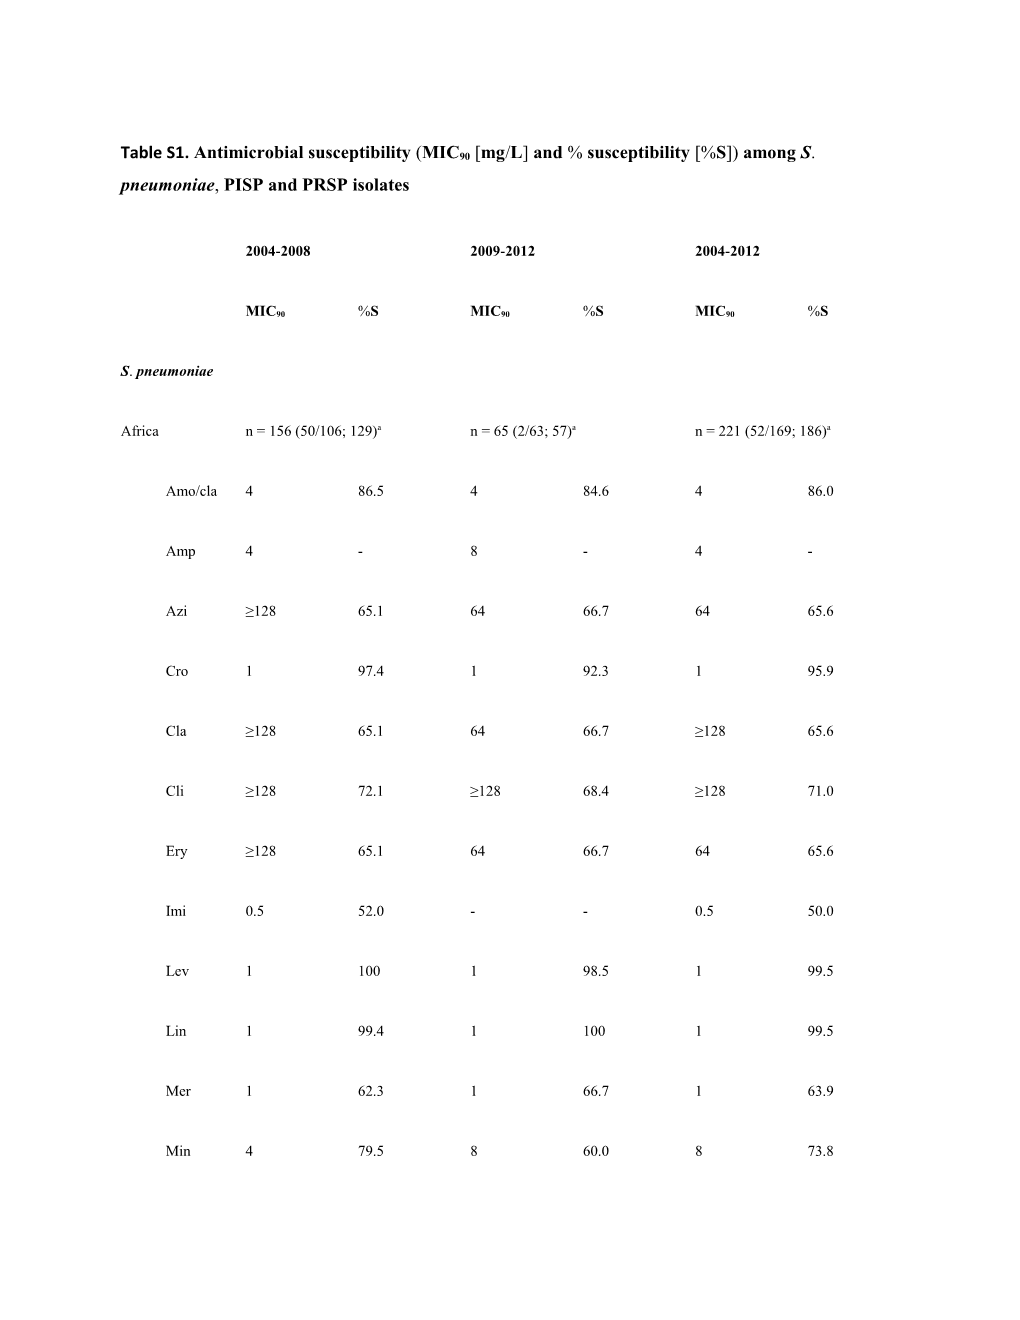 Table S1.Antimicrobial Susceptibility (MIC90 Mg/L and % Susceptibility %S ) Among S